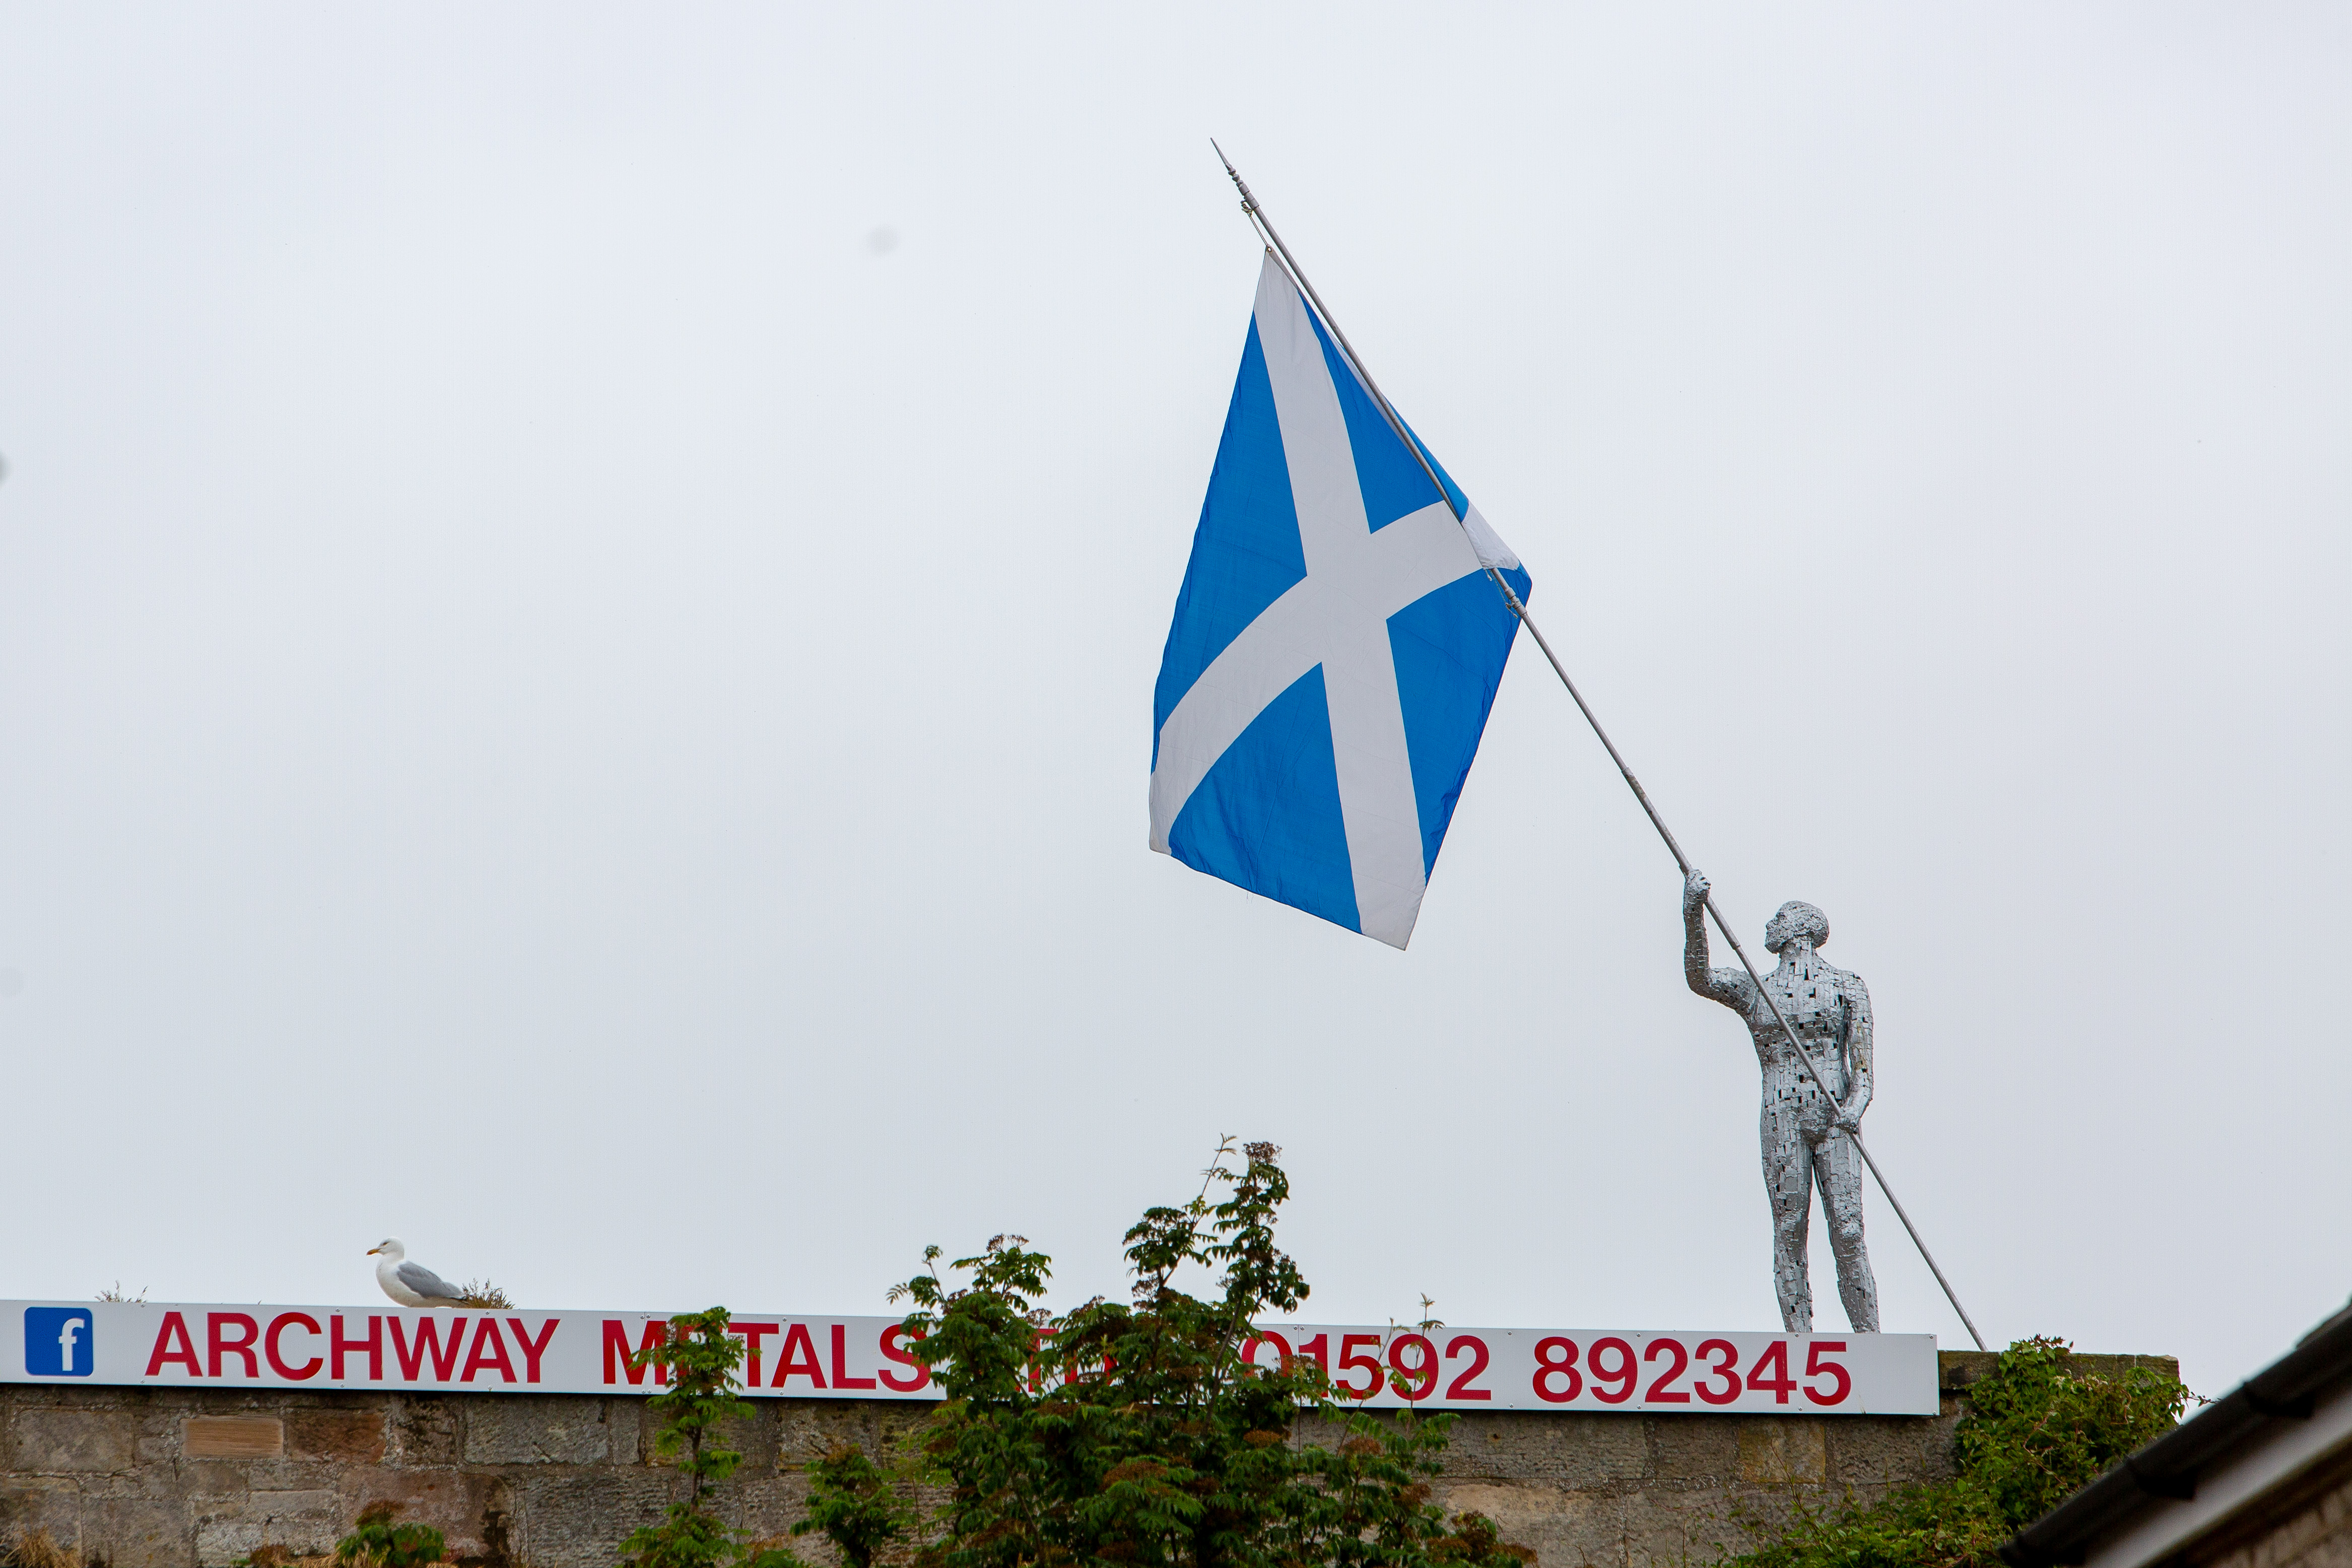 Steel man is no more following a 'lengthy battle' with Fife Council planners